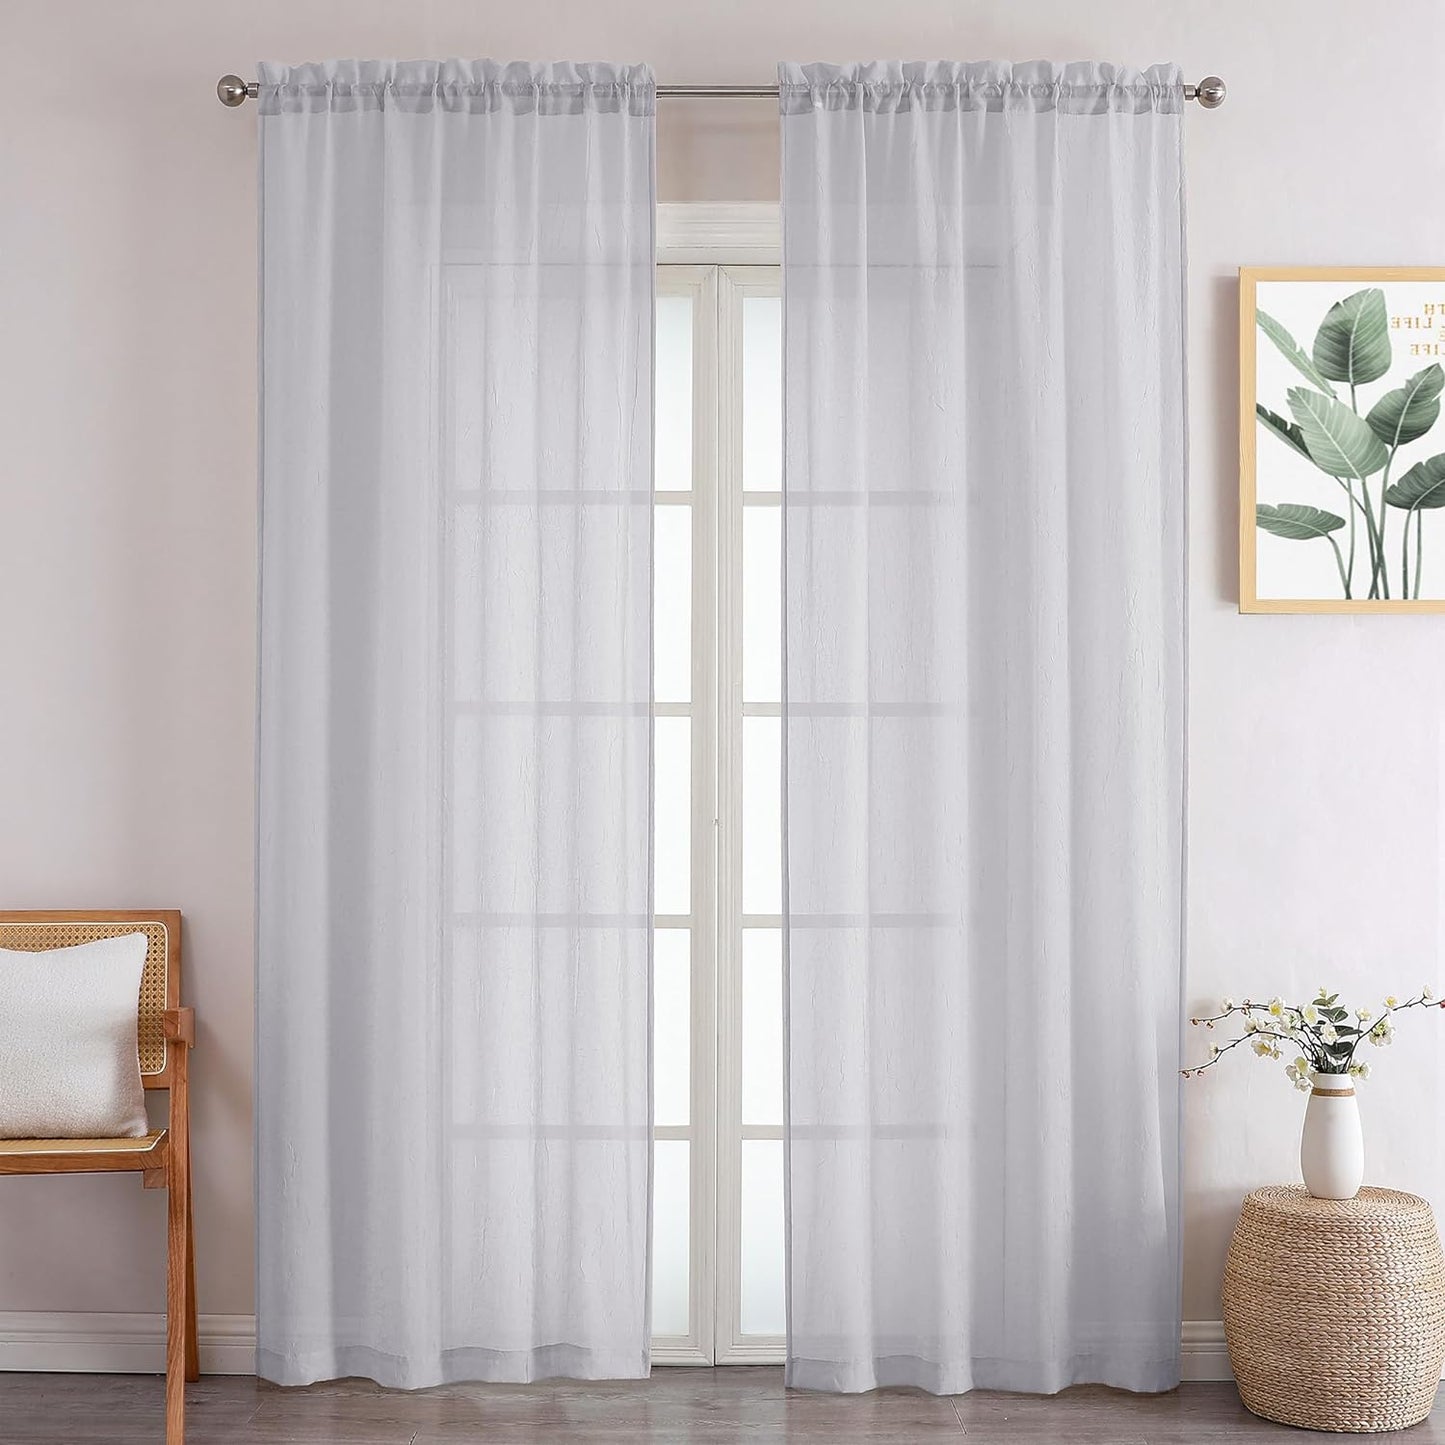 Crushed Sheer White Curtains 63 Inch Length 2 Panels, Light Filtering Solid Crinkle Voile Short Sheer Curtian for Bedroom Living Room, Each 42Wx63L Inches  Chyhomenyc Light Grey 42 W X 96 L 